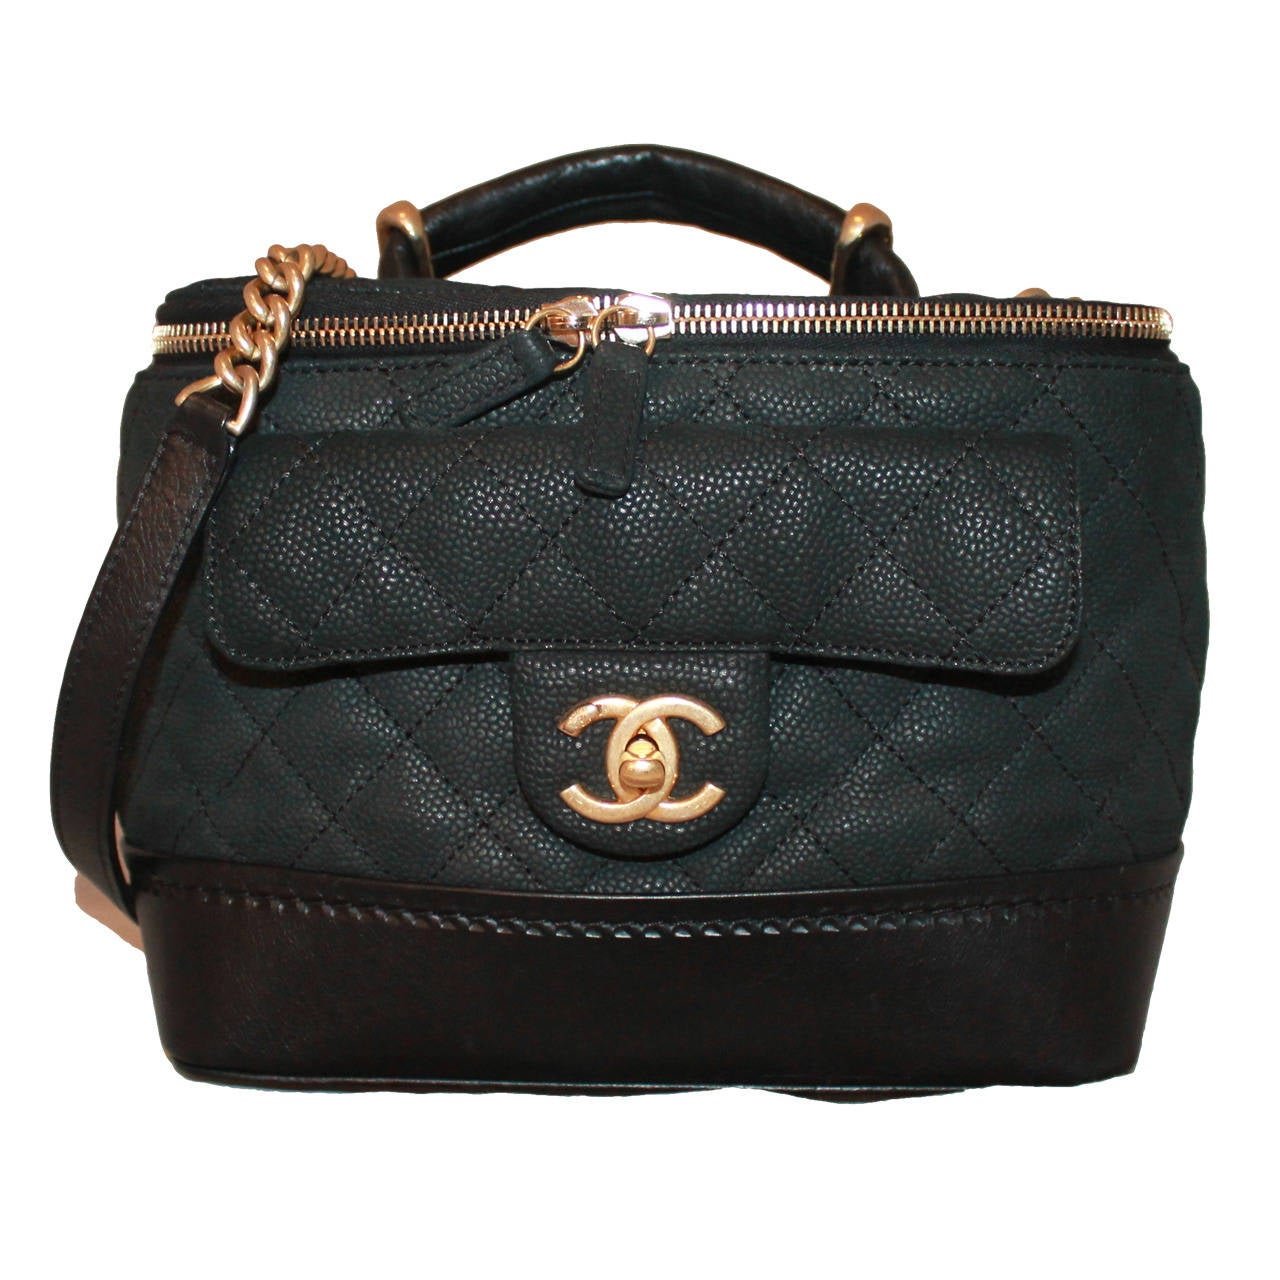 Chanel Black Leather Quilted Globe Trotter Handbag - circa 2014 at 1stdibs